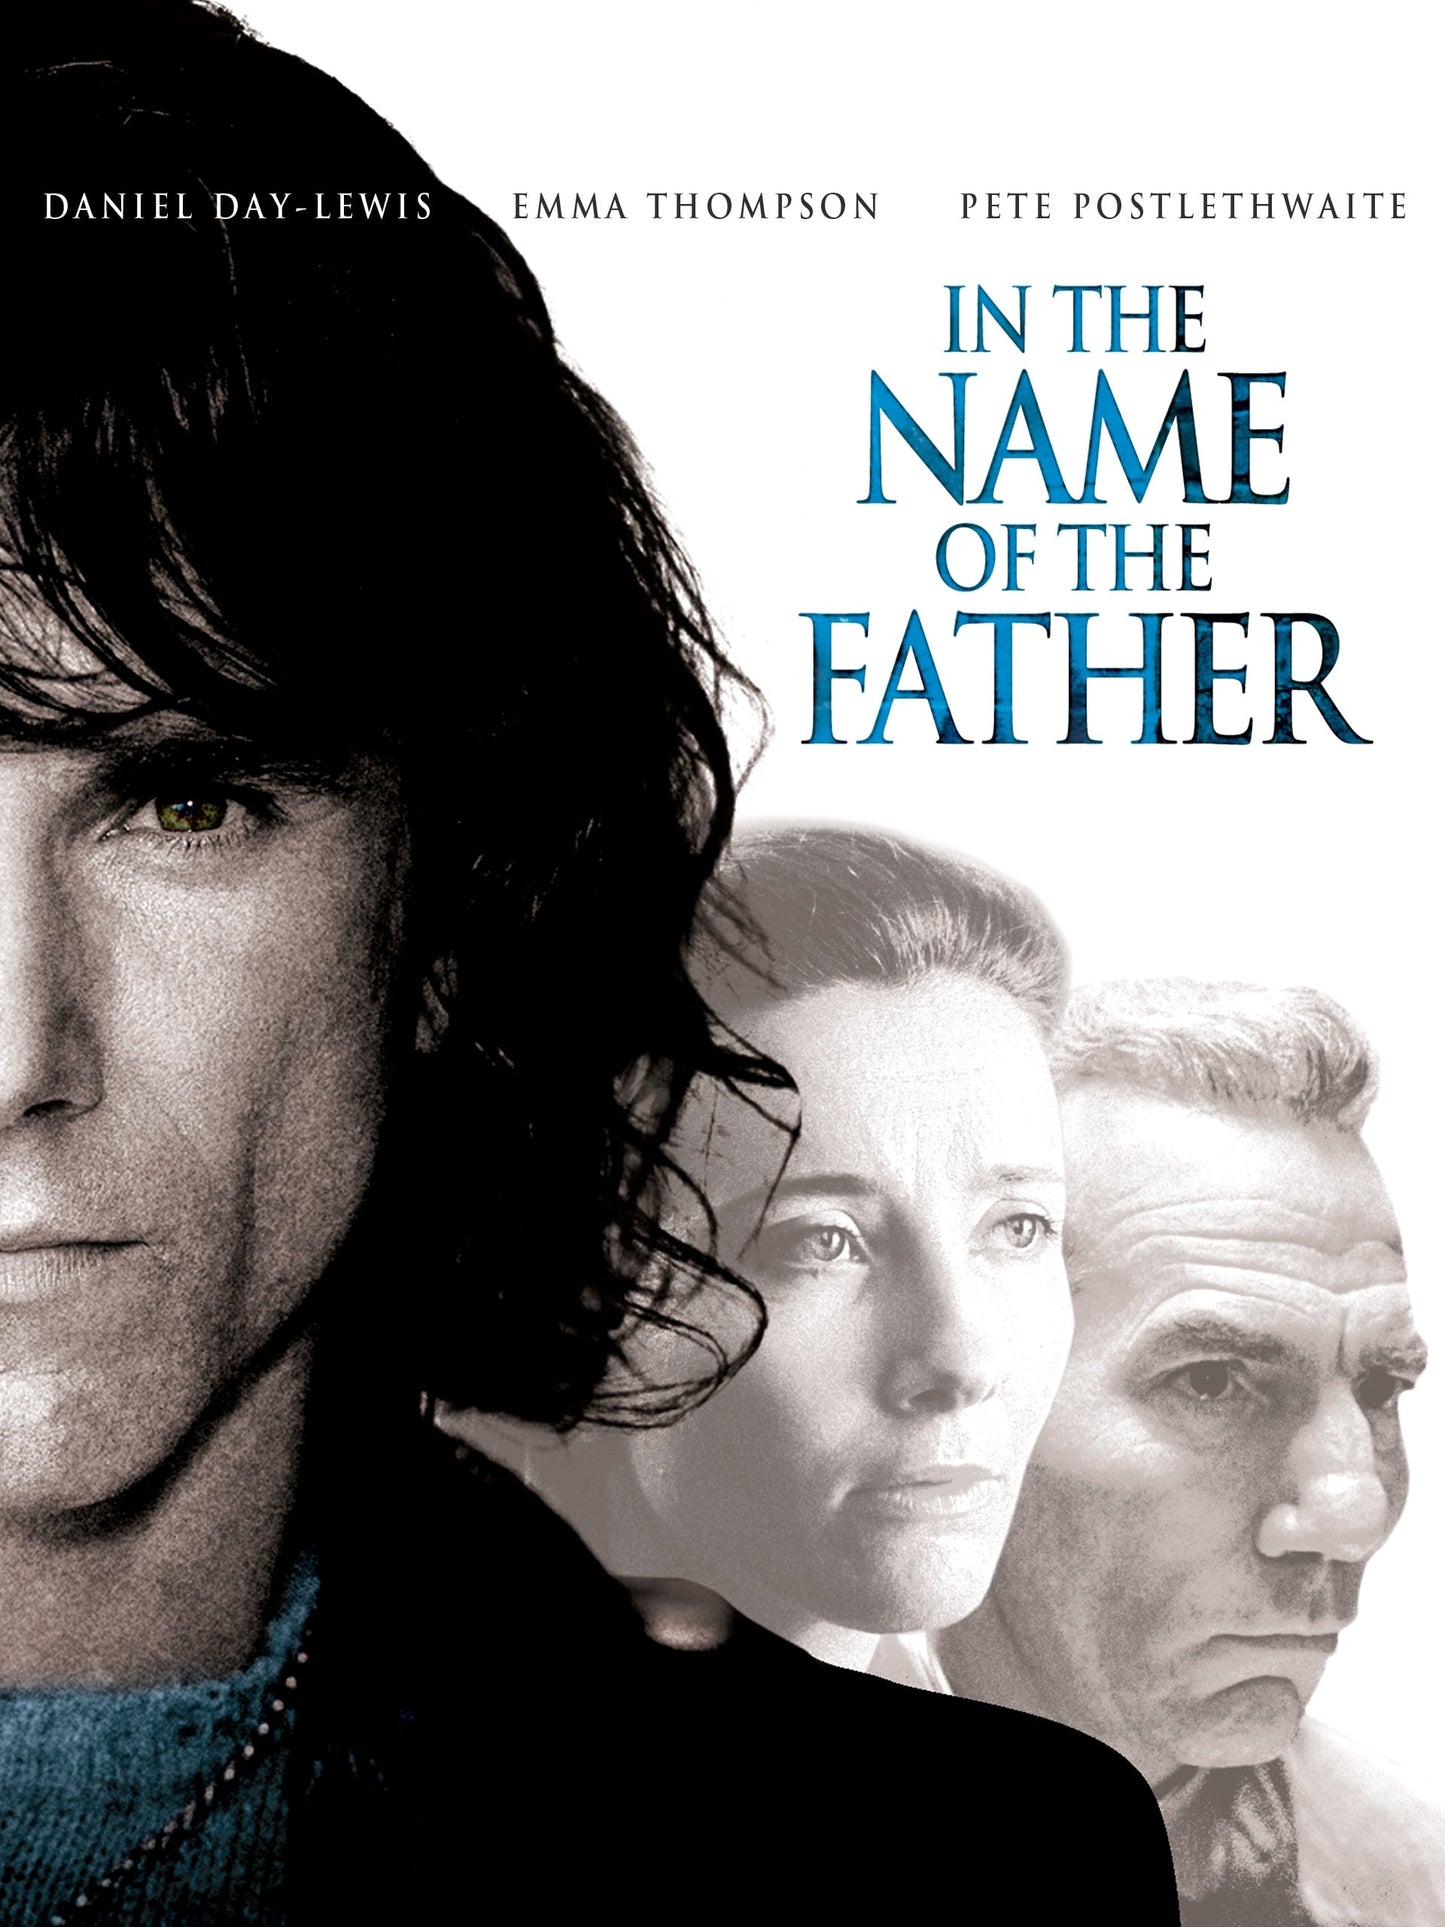 Poster: In the name of the father